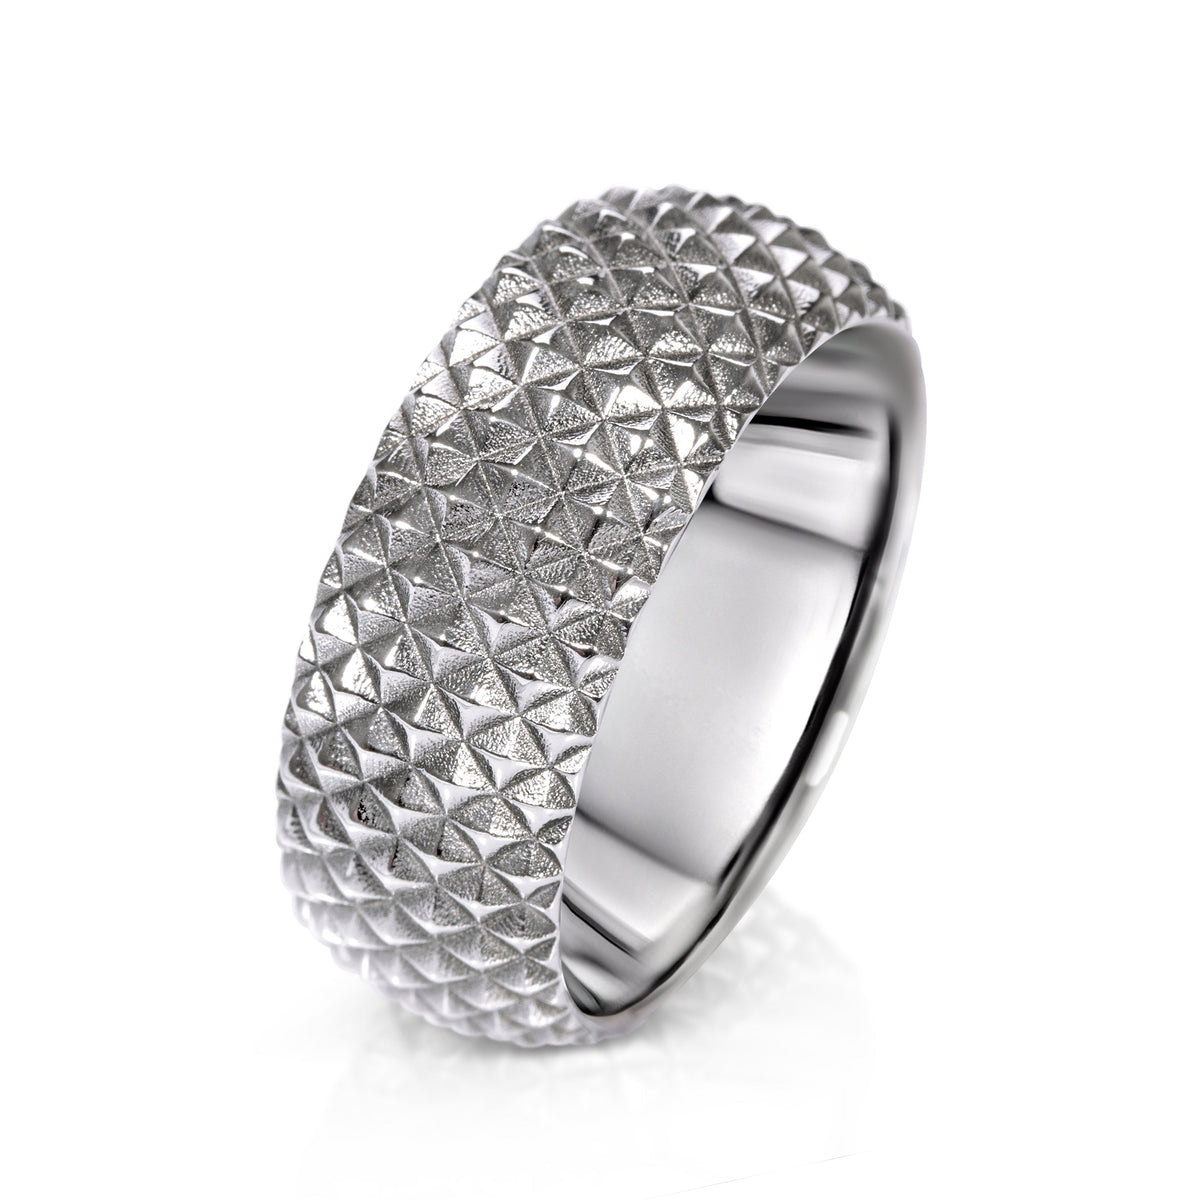 Magnificent textured and round shaped 9 mmring